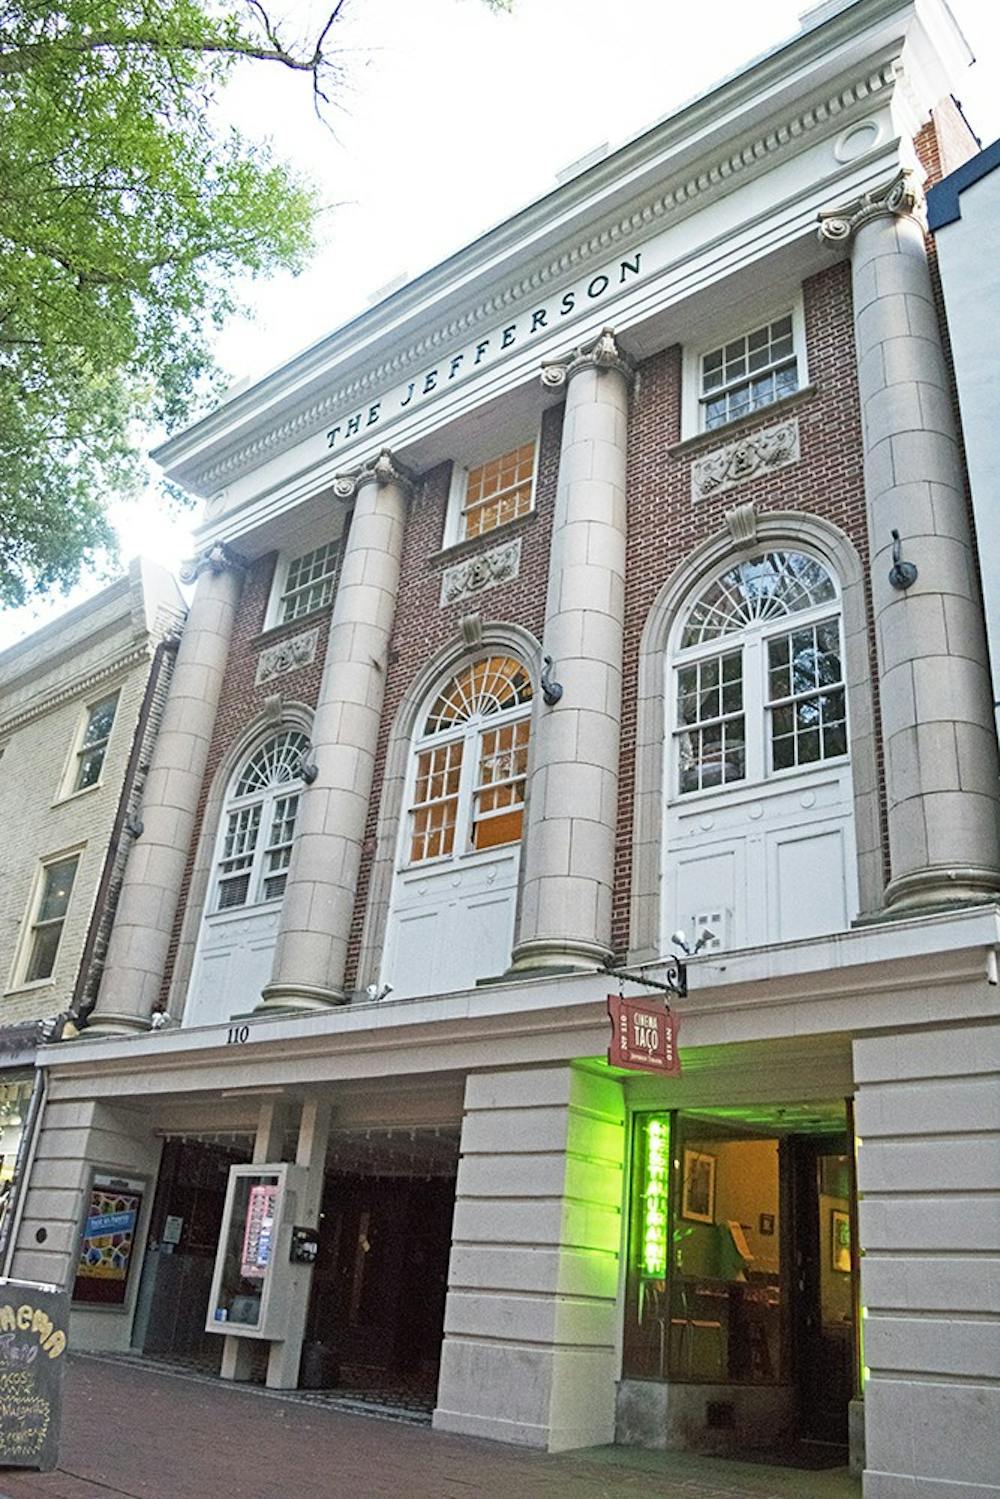 <p>Leary said the Jefferson Theater is hosting the benefit concert to show solidarity and support for Cville Pride and the local community.&nbsp;</p>